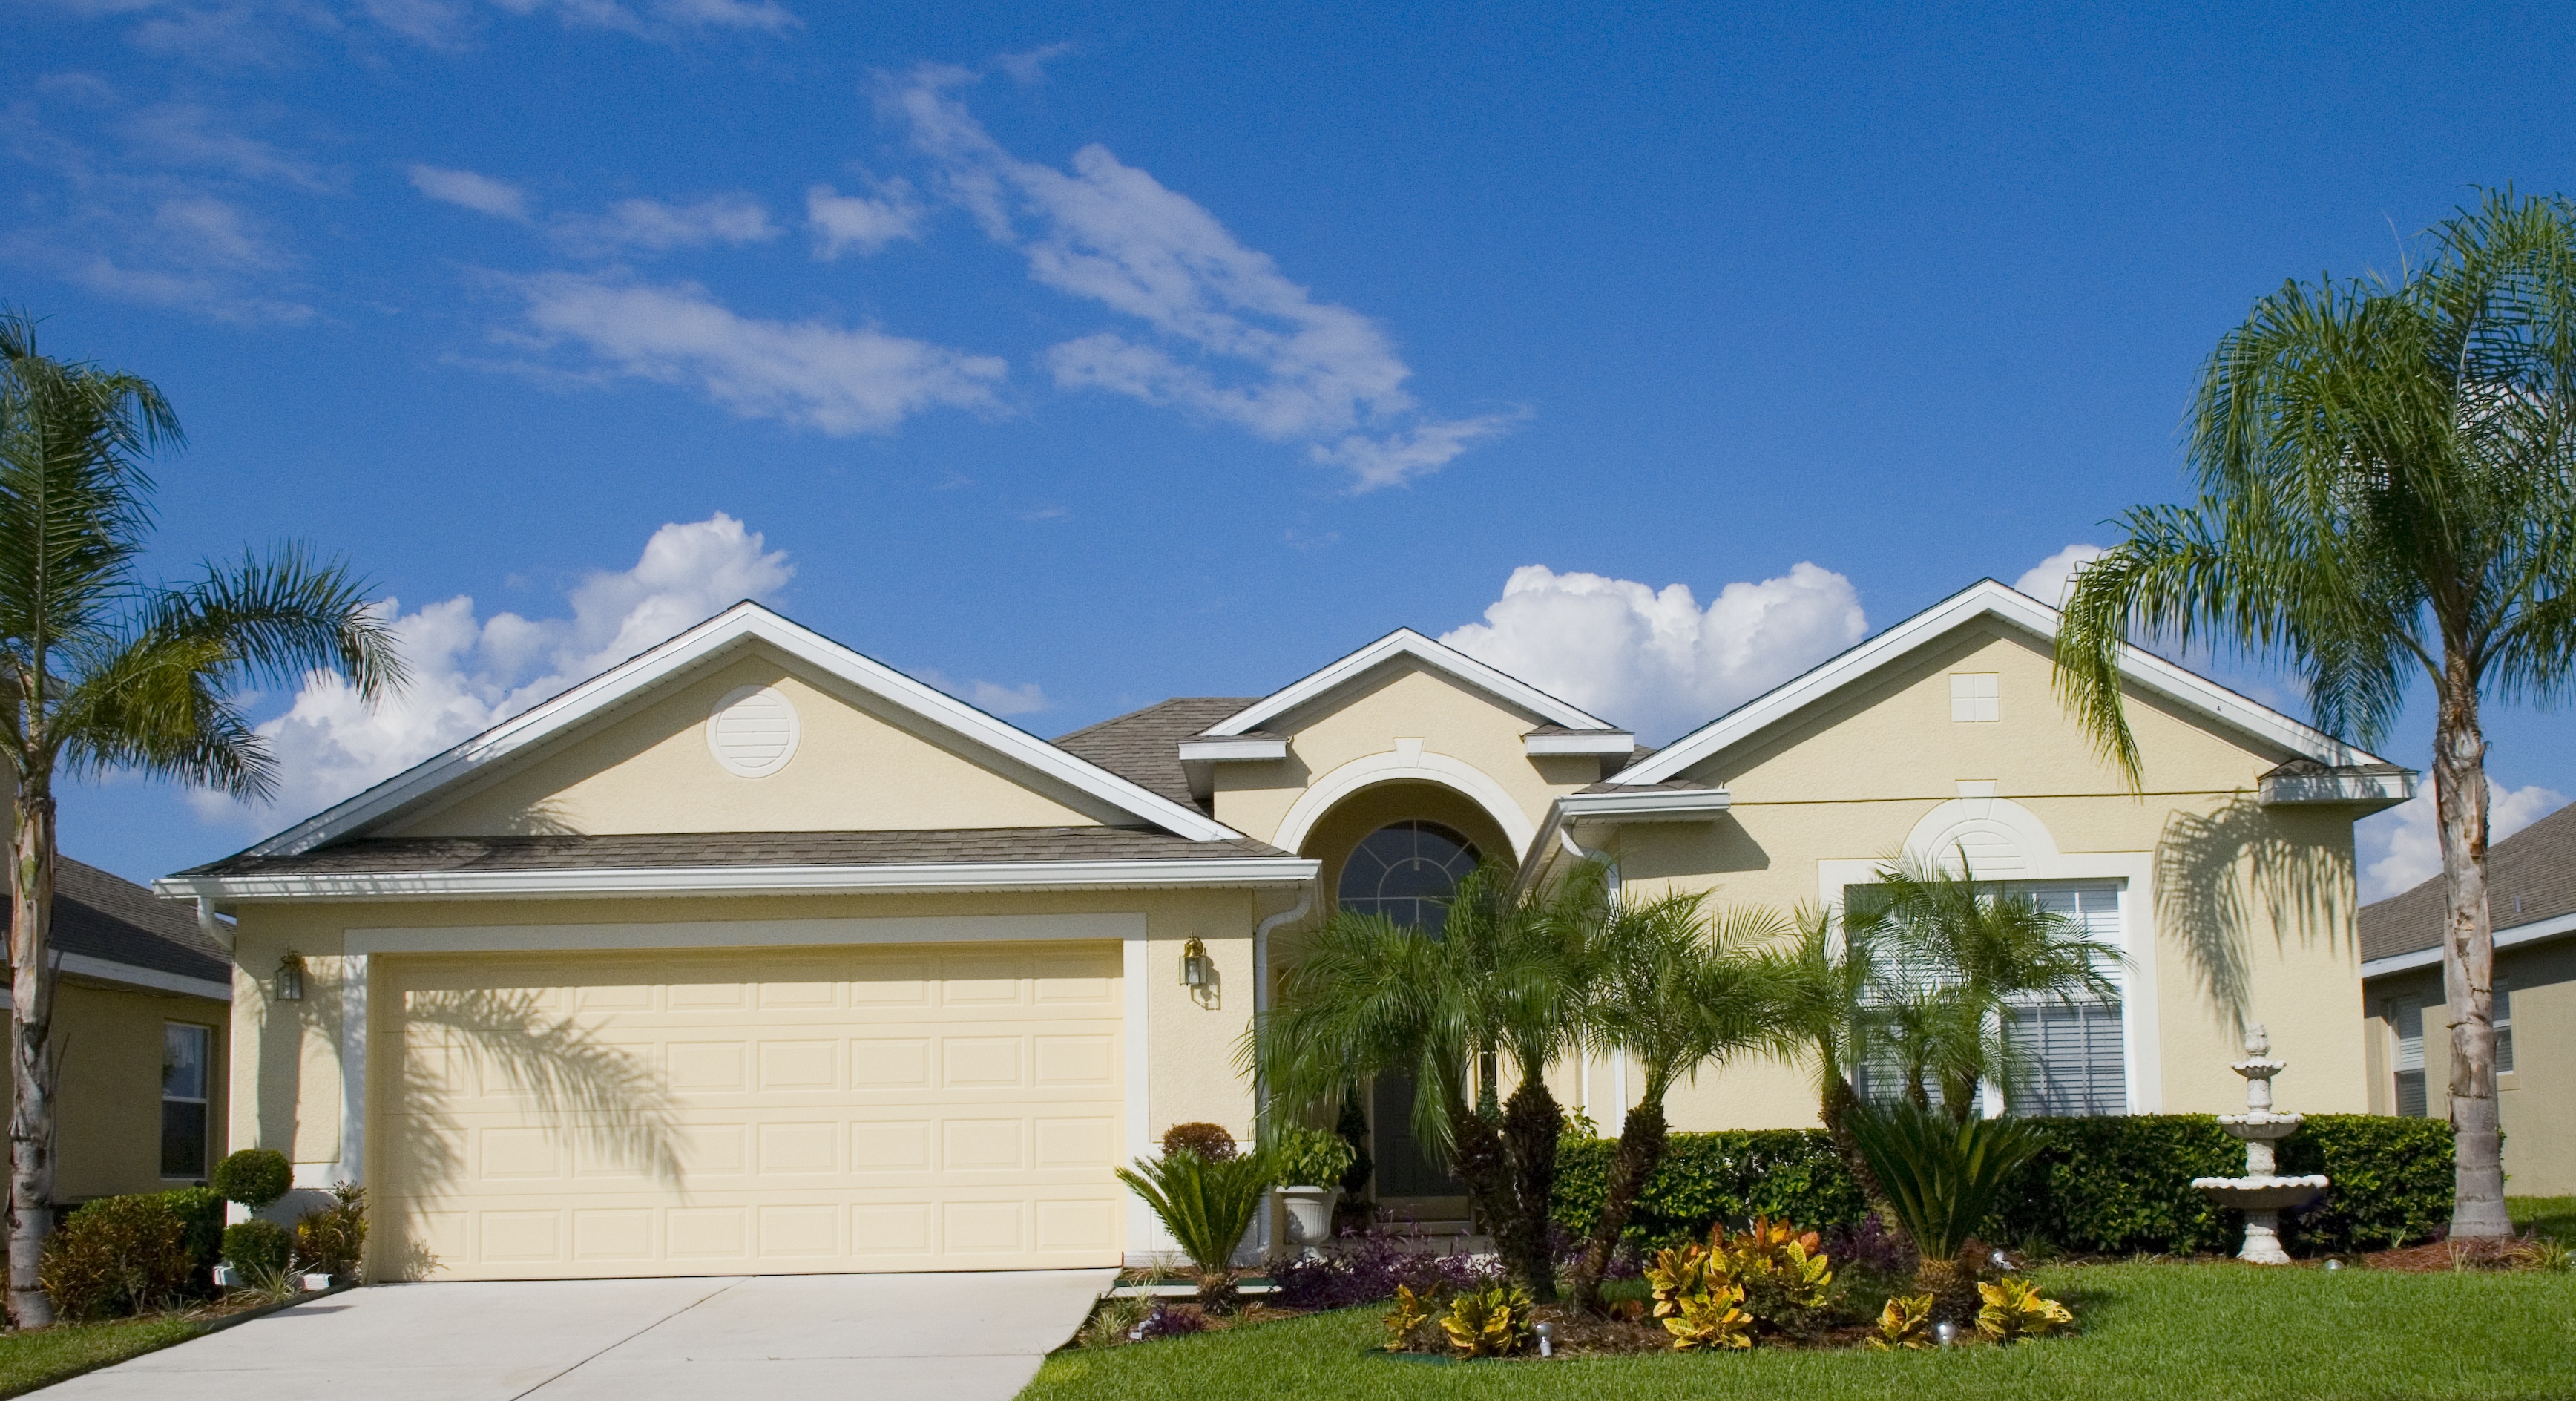 Florida Roof Inspection for Homeowner Insurance